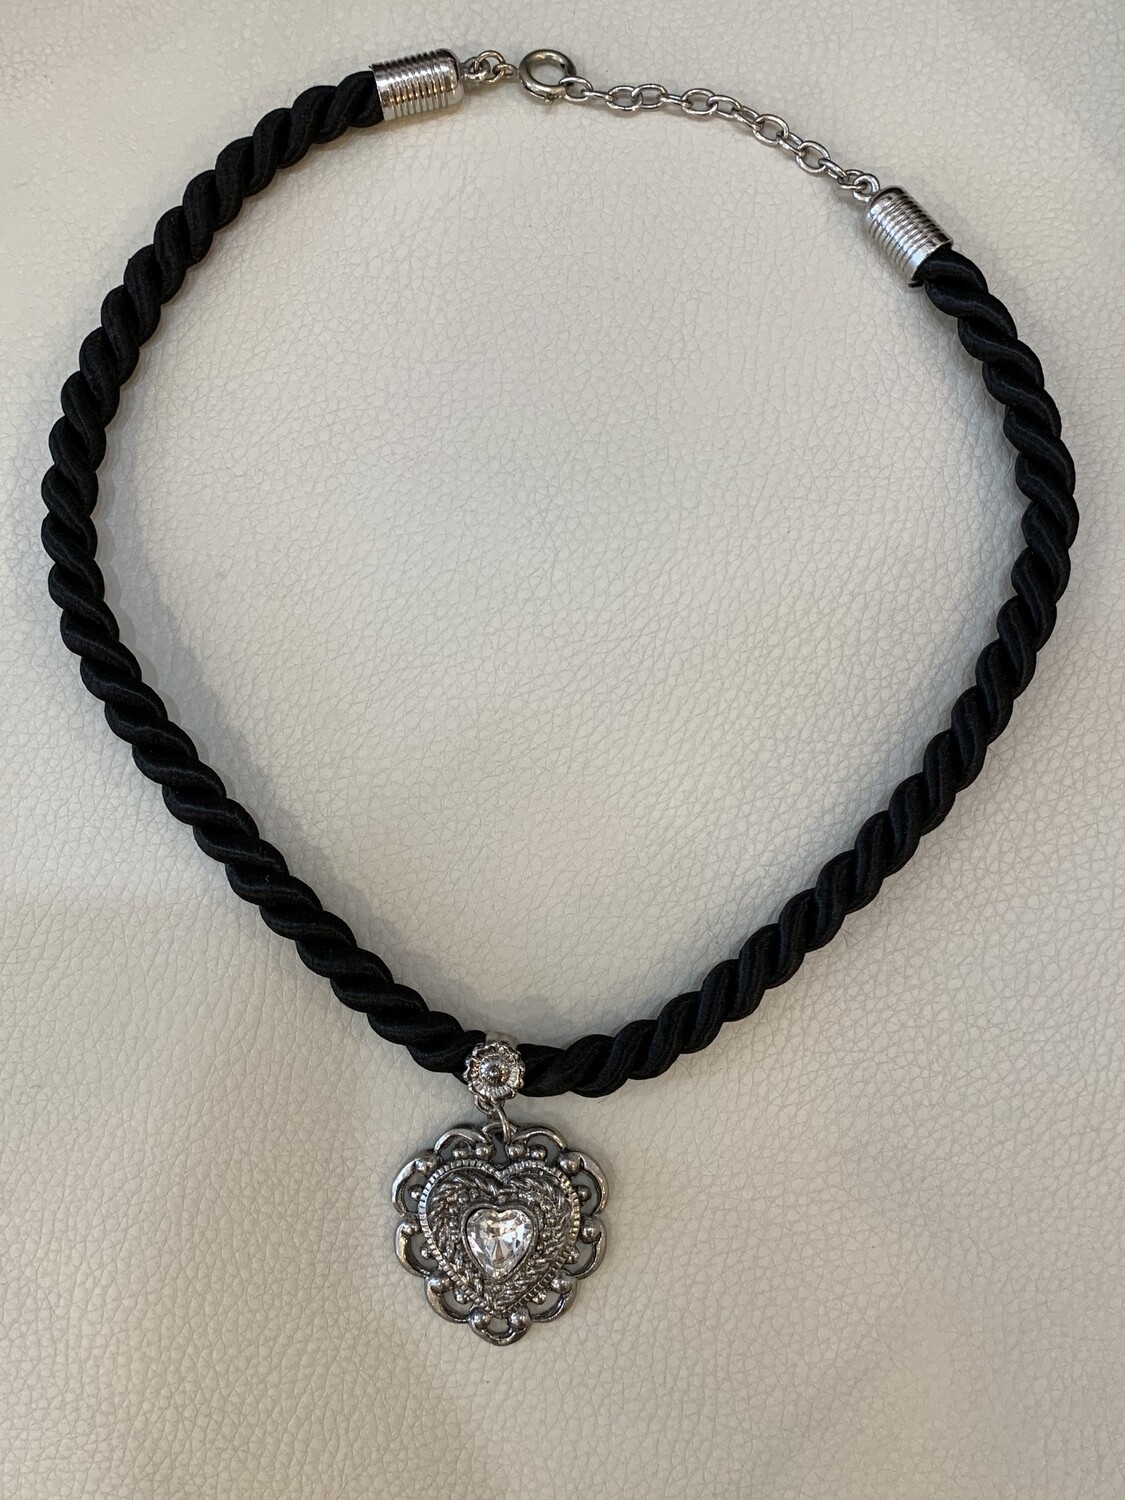 Black Rope Braided Chain Necklace With Silver Heart Pendant